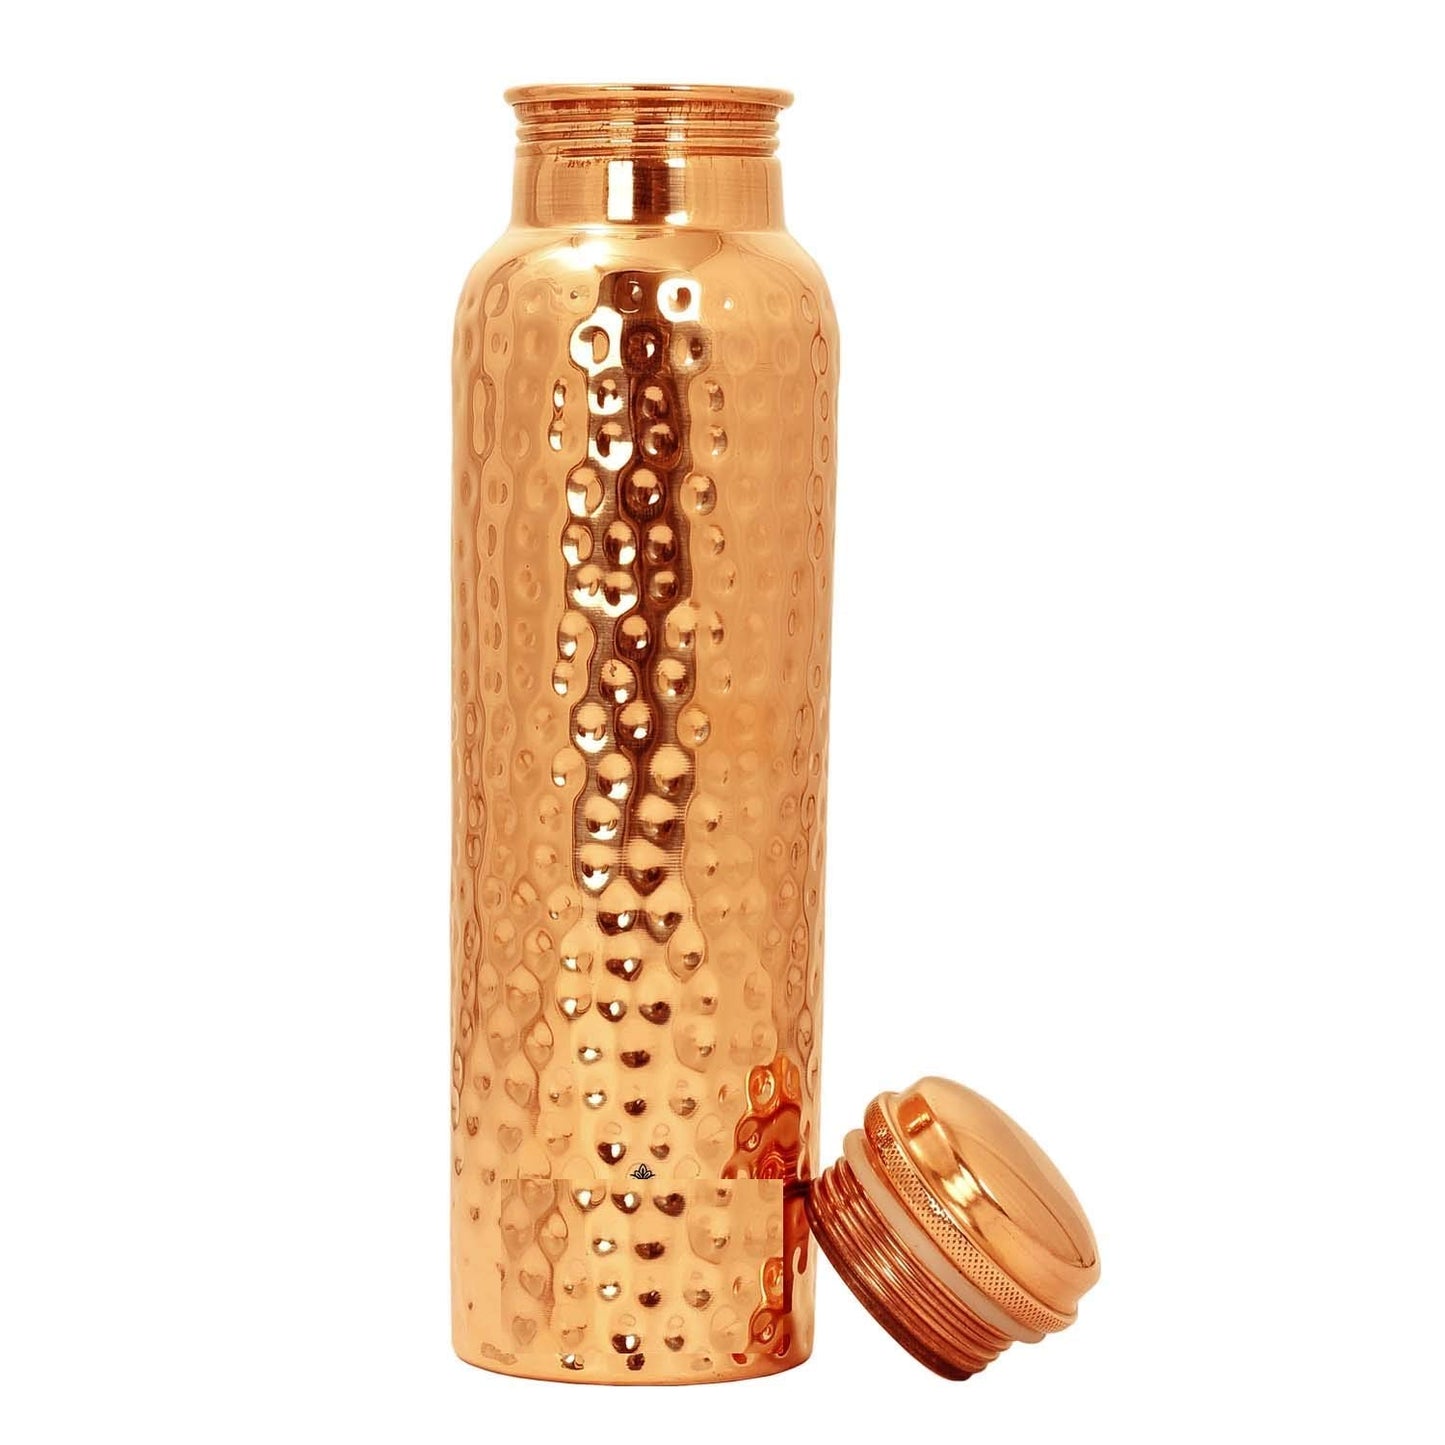 Rudra Exports Hammered Copper Water Bottles 1 Litre Best Combo